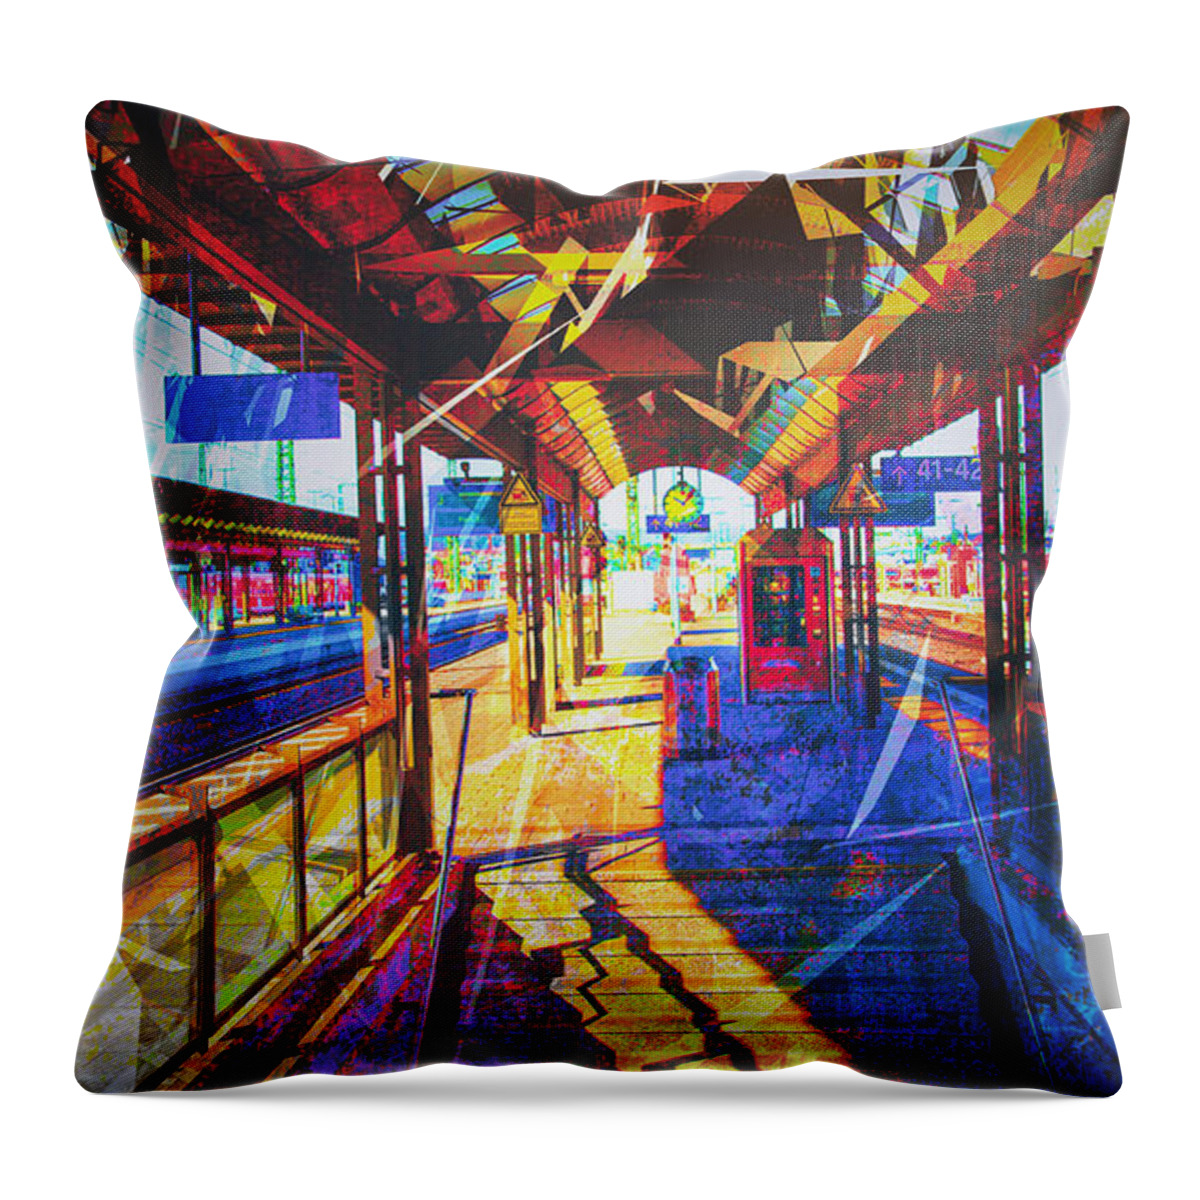 Backgrounds Throw Pillow featuring the photograph Train Station No. 2 by James Bethanis